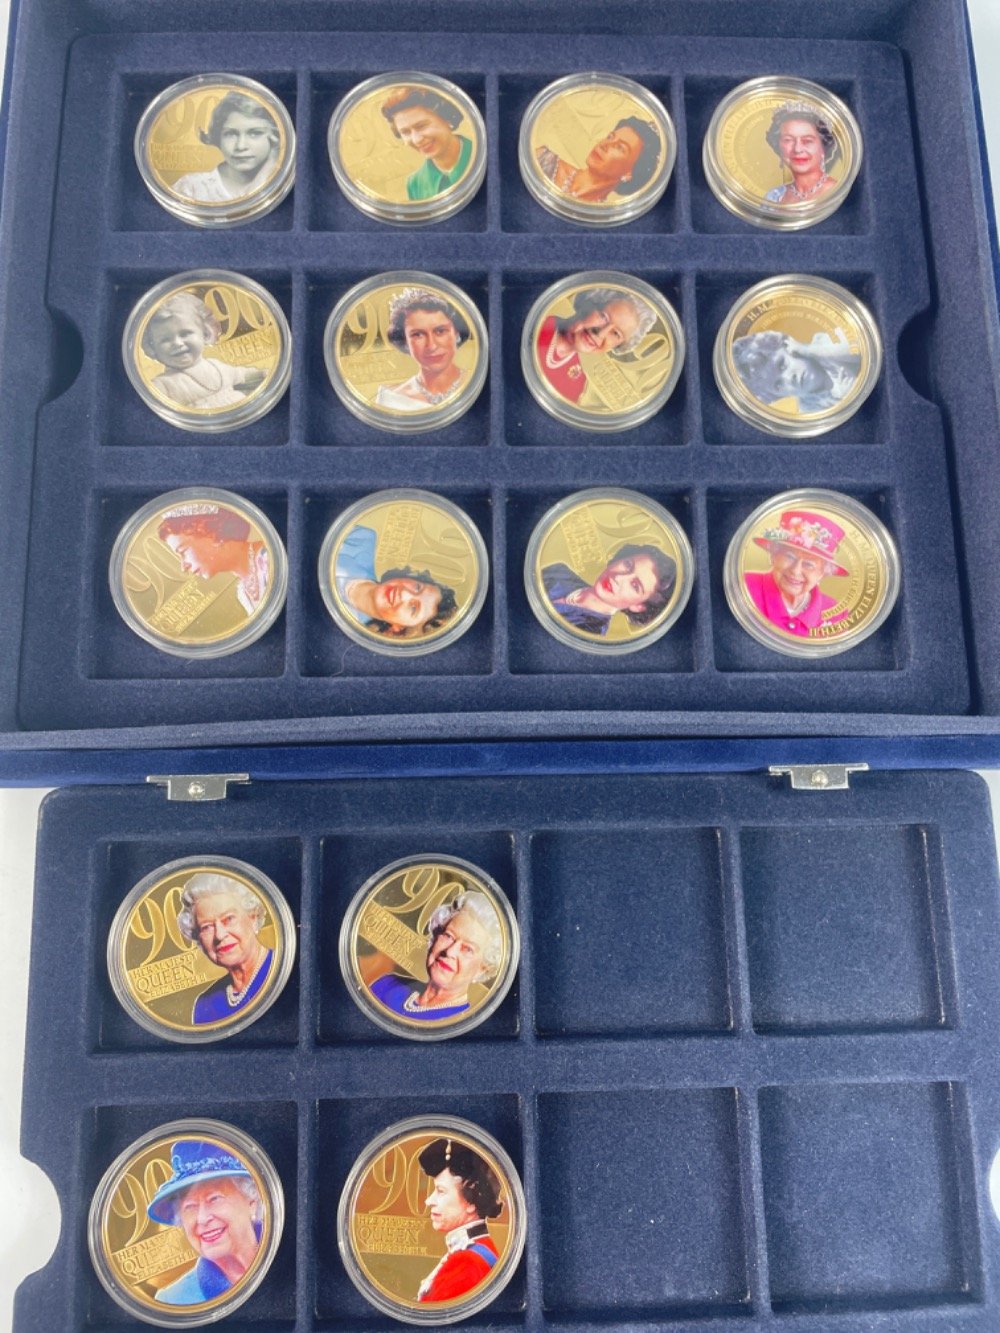 A Queen Elizabeth II 90th birthday collection of coins - 16 Commemorative coin set within an - Image 2 of 2